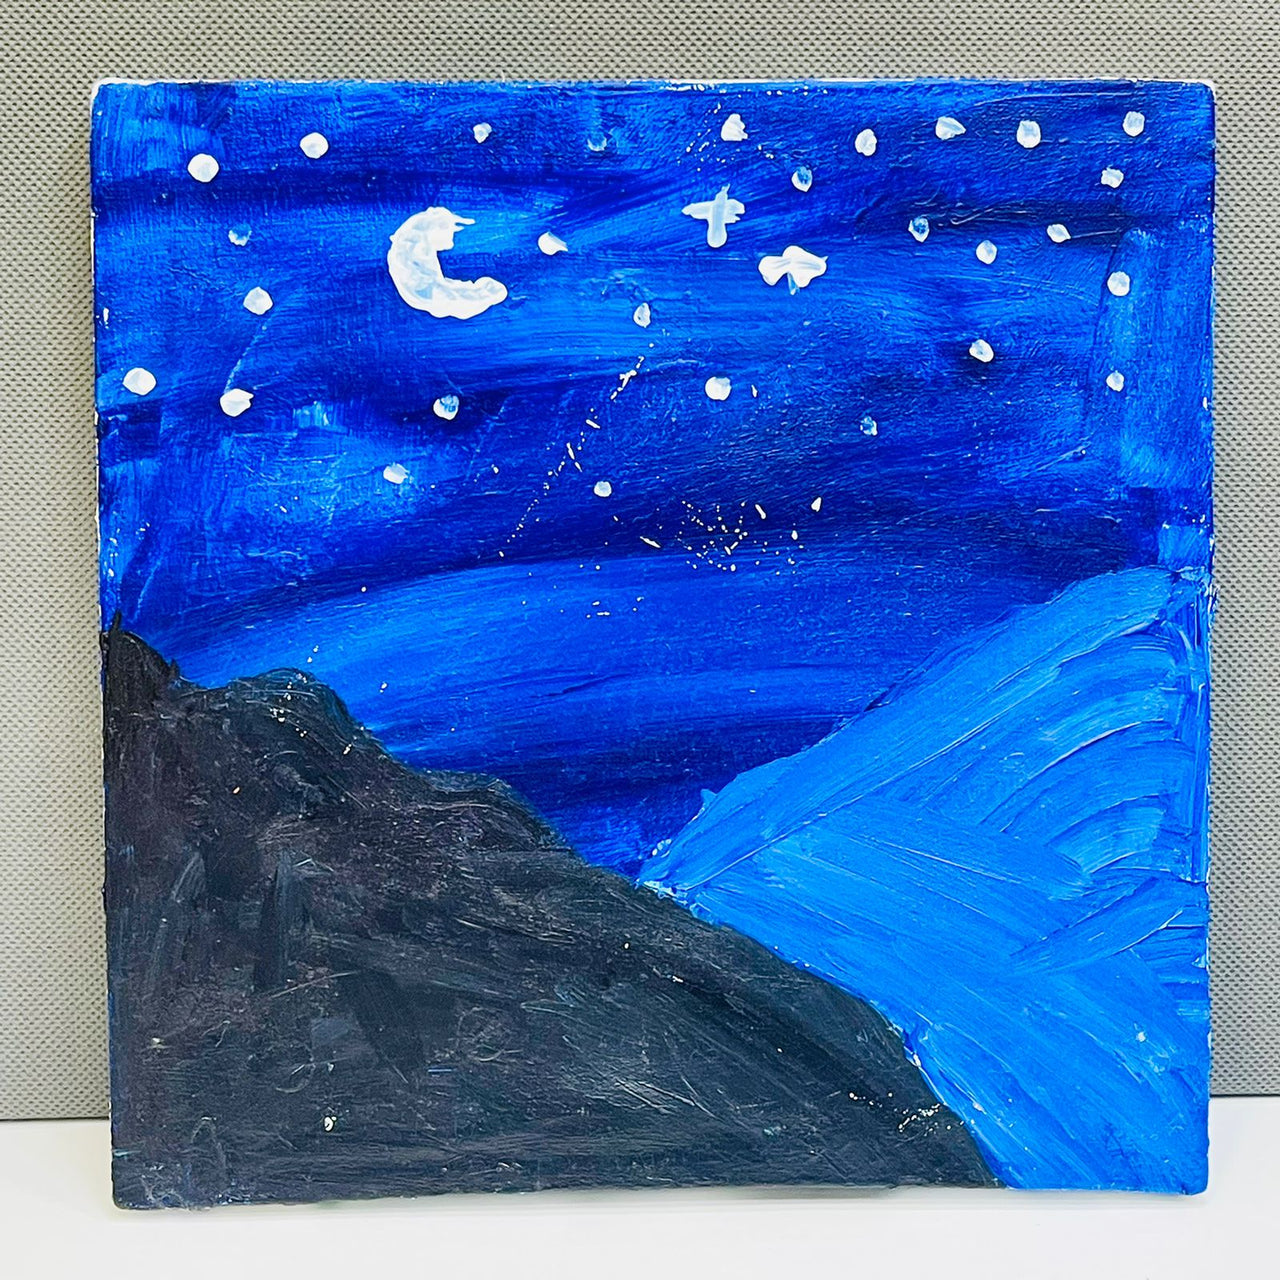 10x10* Inches Night View Canvas Painting